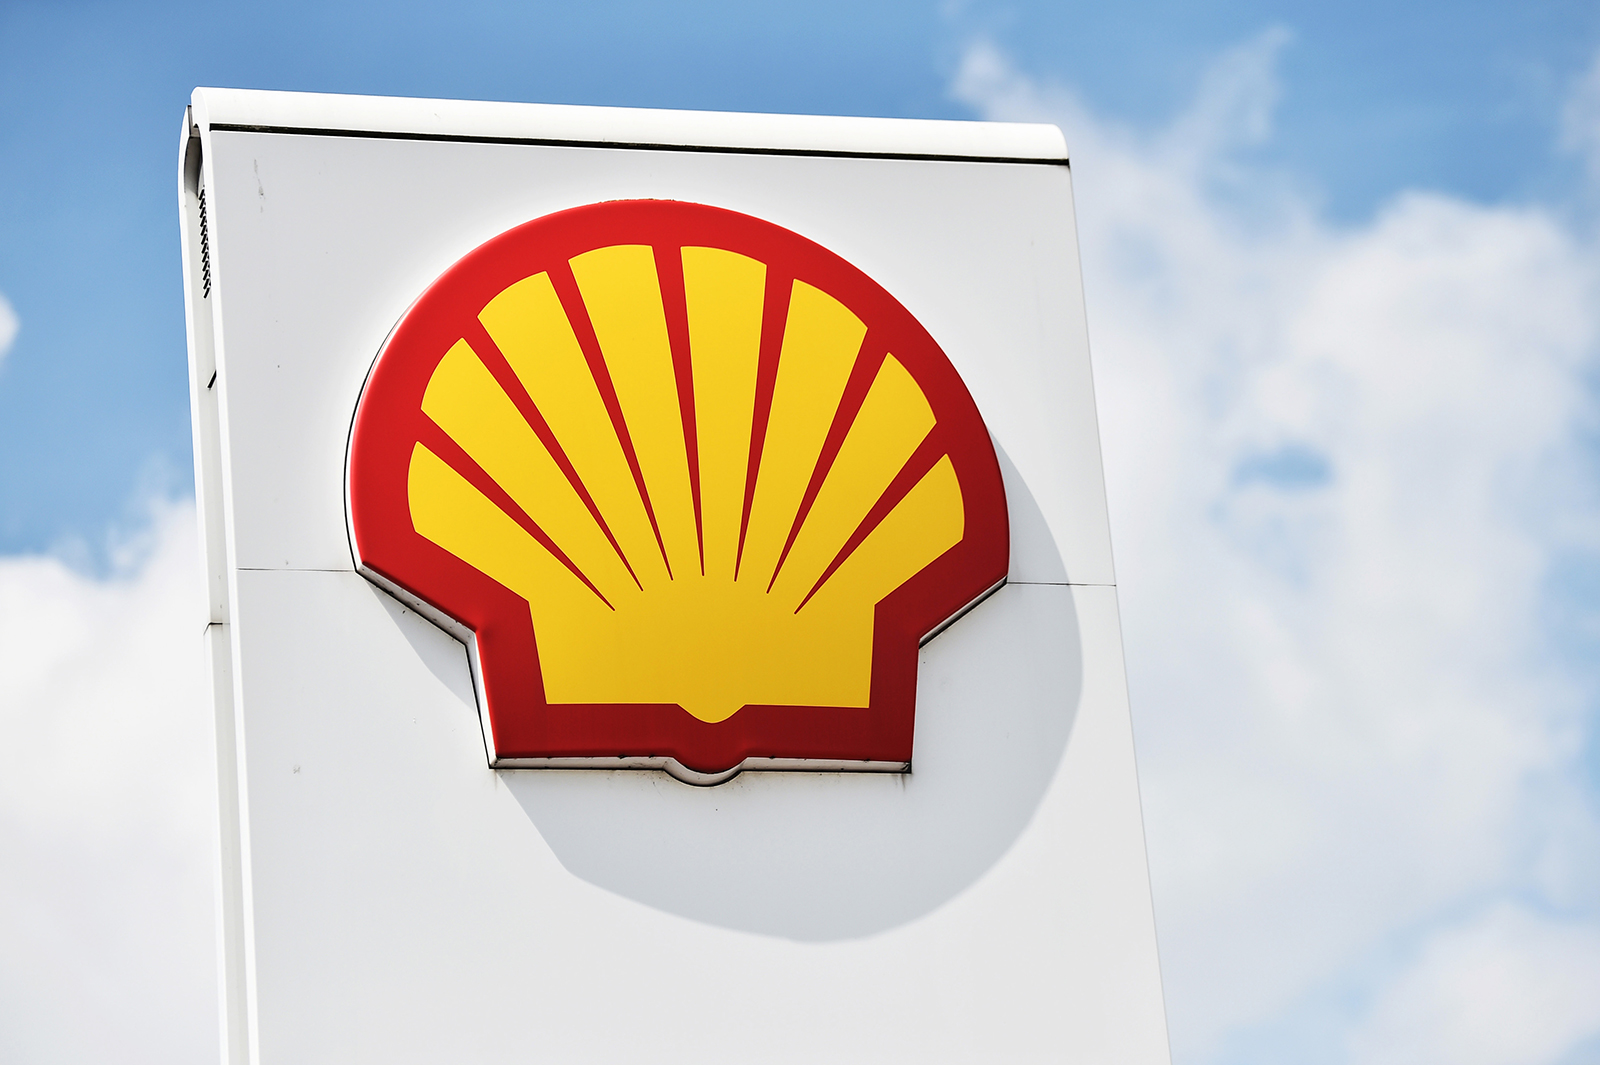 The Shell logo is displayed outside one of its gas stations on May 27, 2021 in Leeds, England.